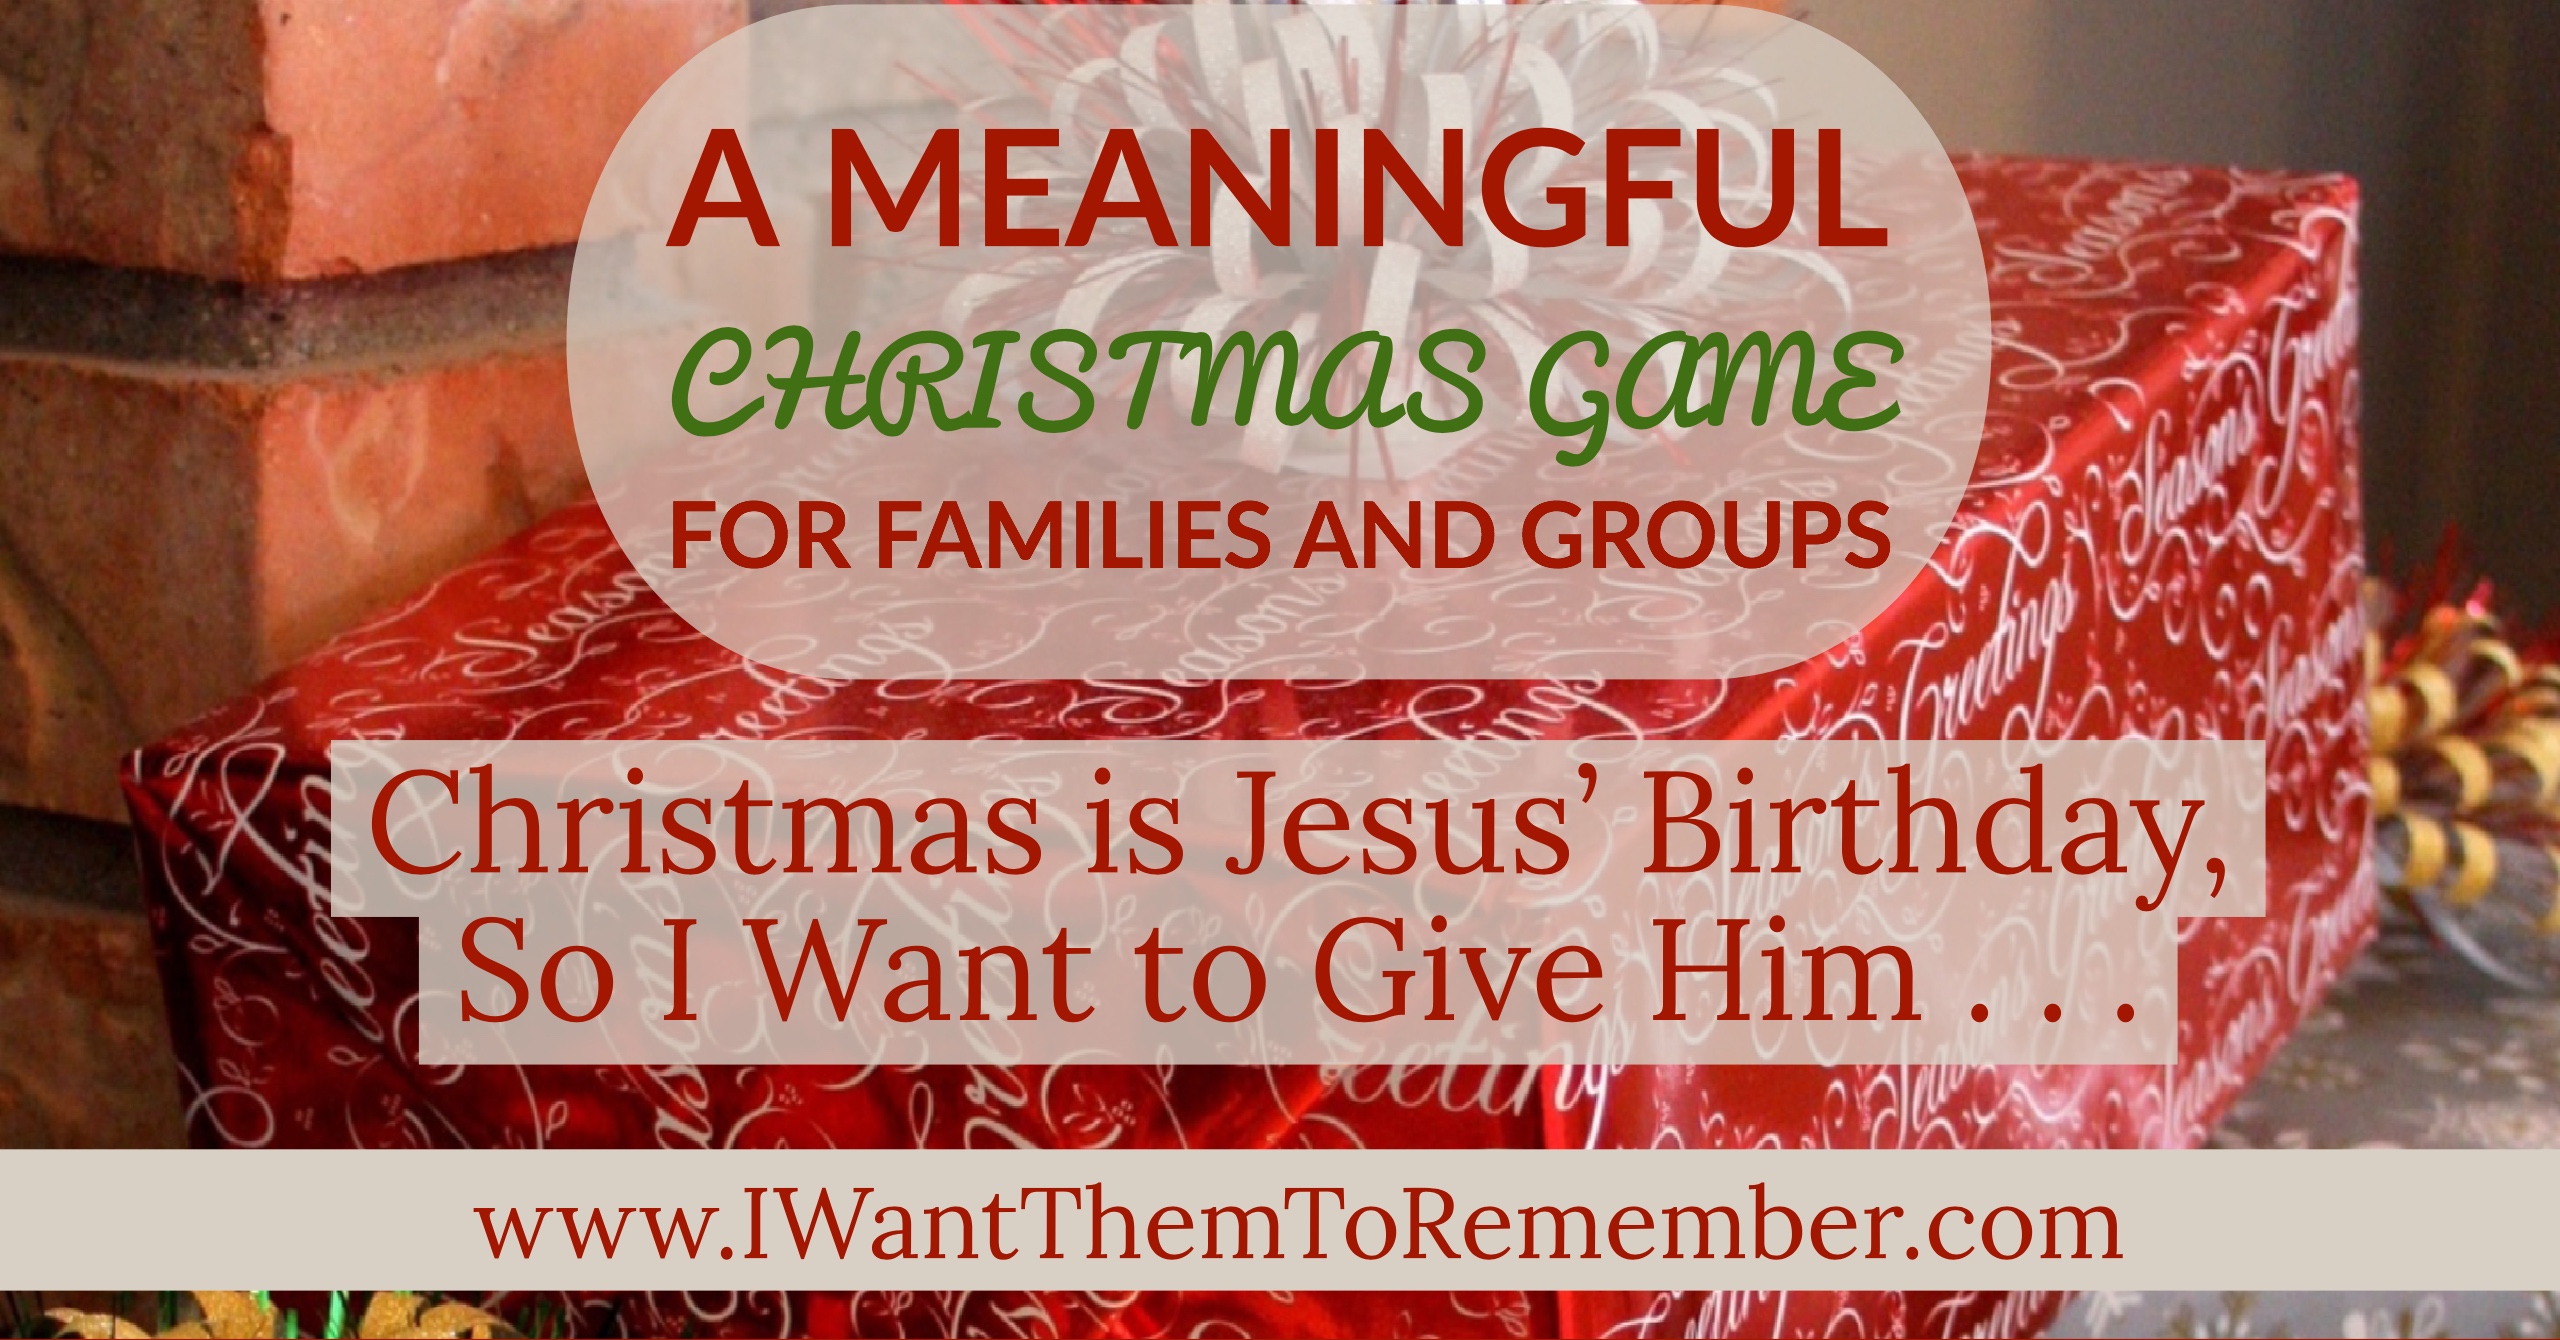 Christmas Is Jesus’ Birthday . . . A Meaningful Christmas Game for Families & Groups